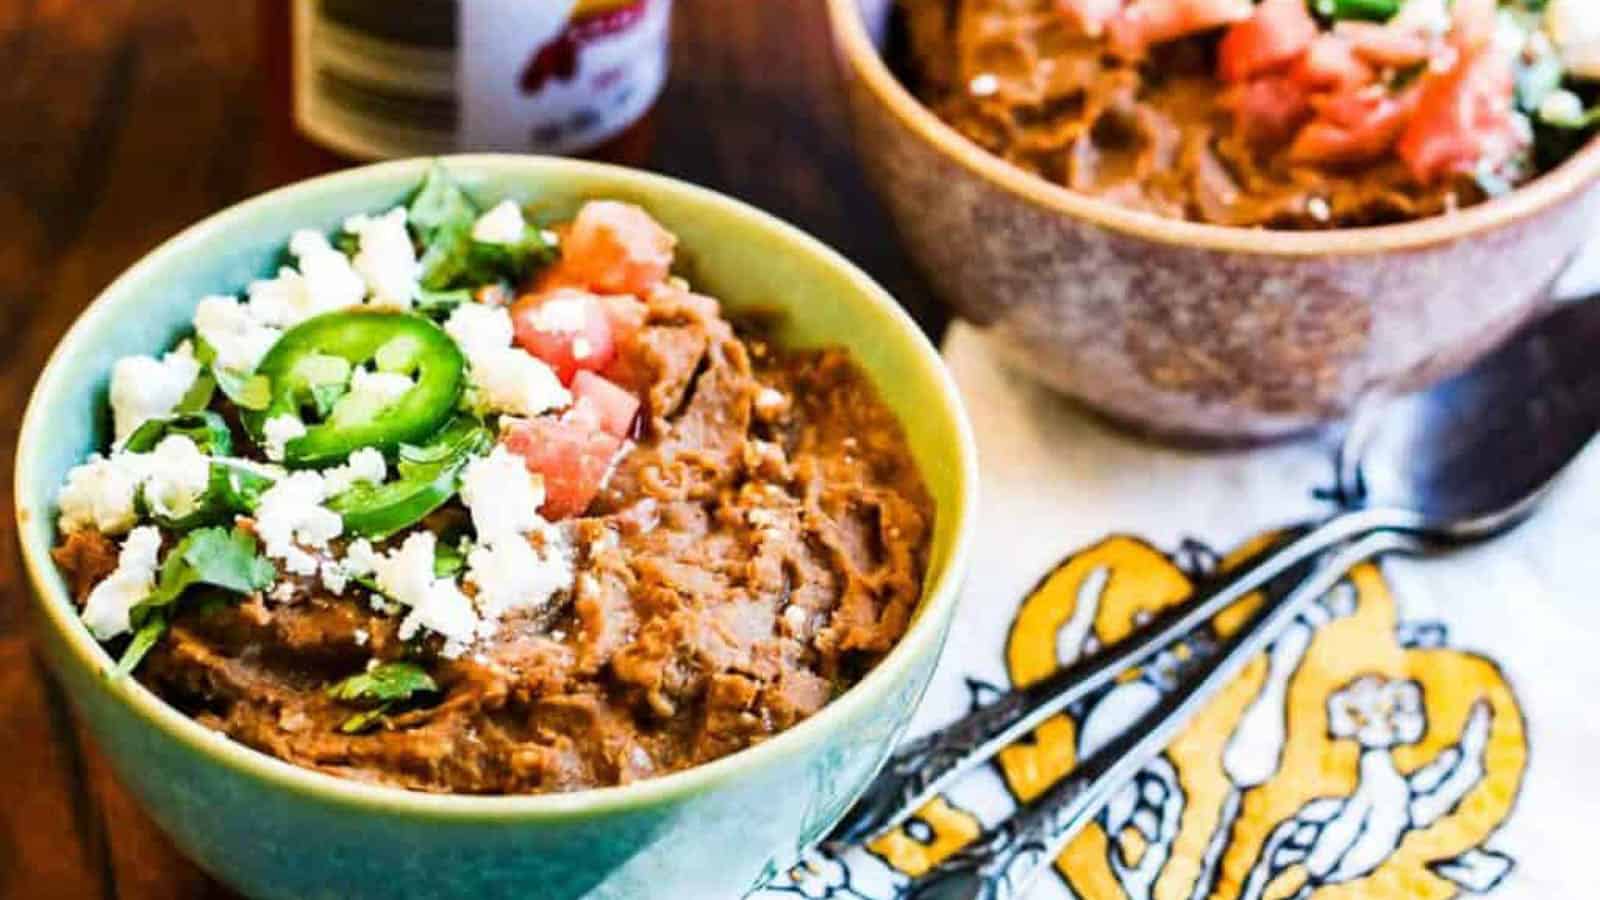 Bowls of refried beans garnished with sliced jalapenos, cheese, and tomatoes with a napkin and two spoons on the side.